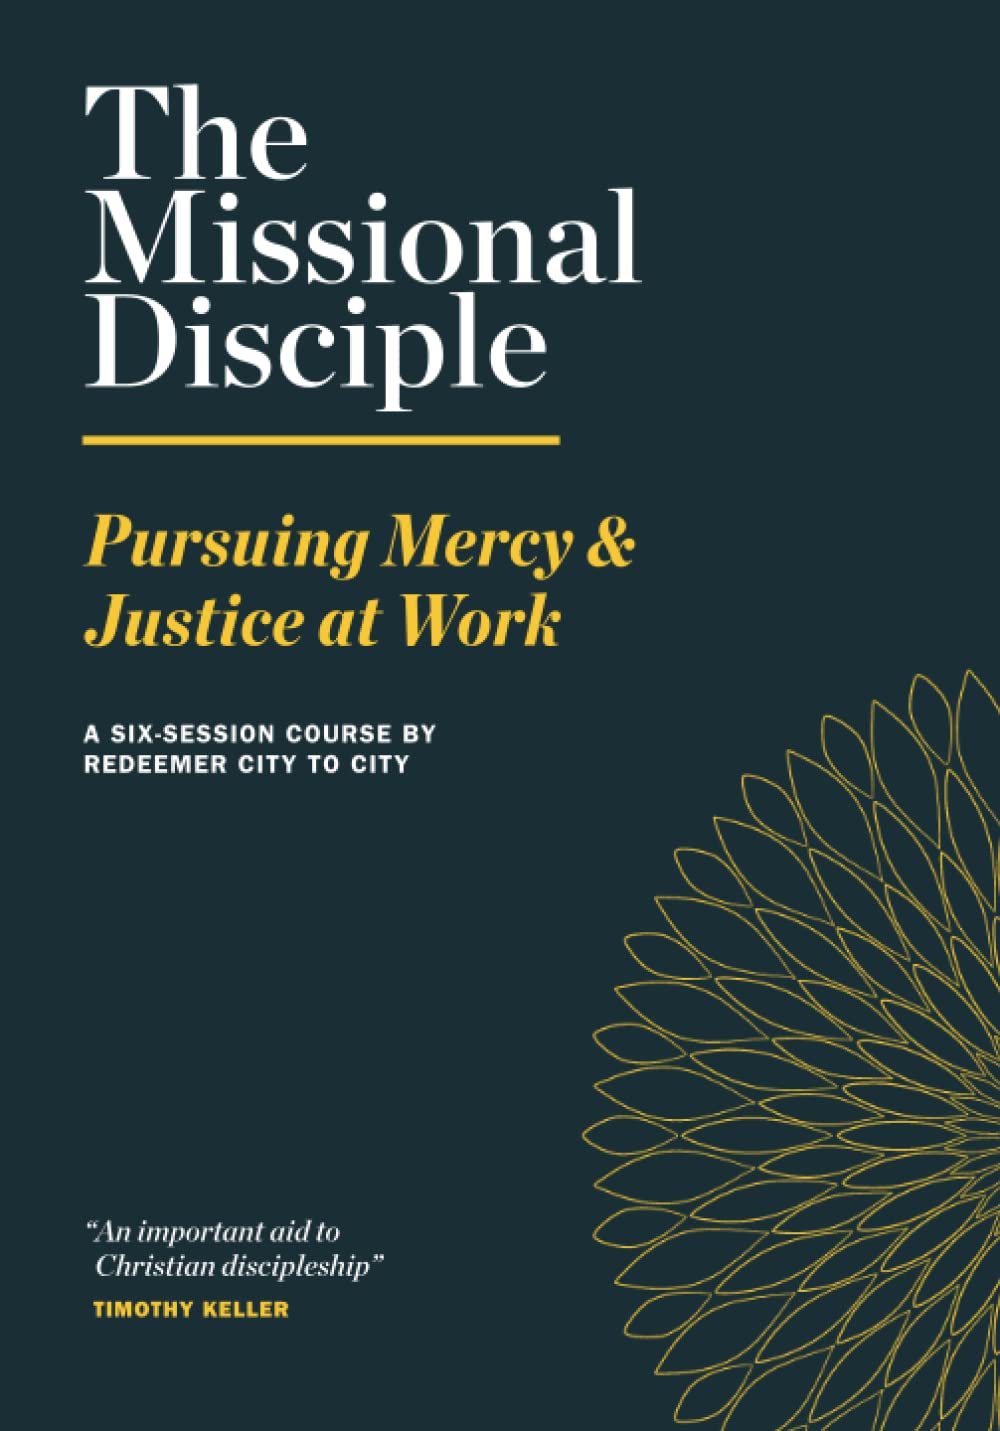 The Missional Disciple: Pursuing Mercy & Justice at Work